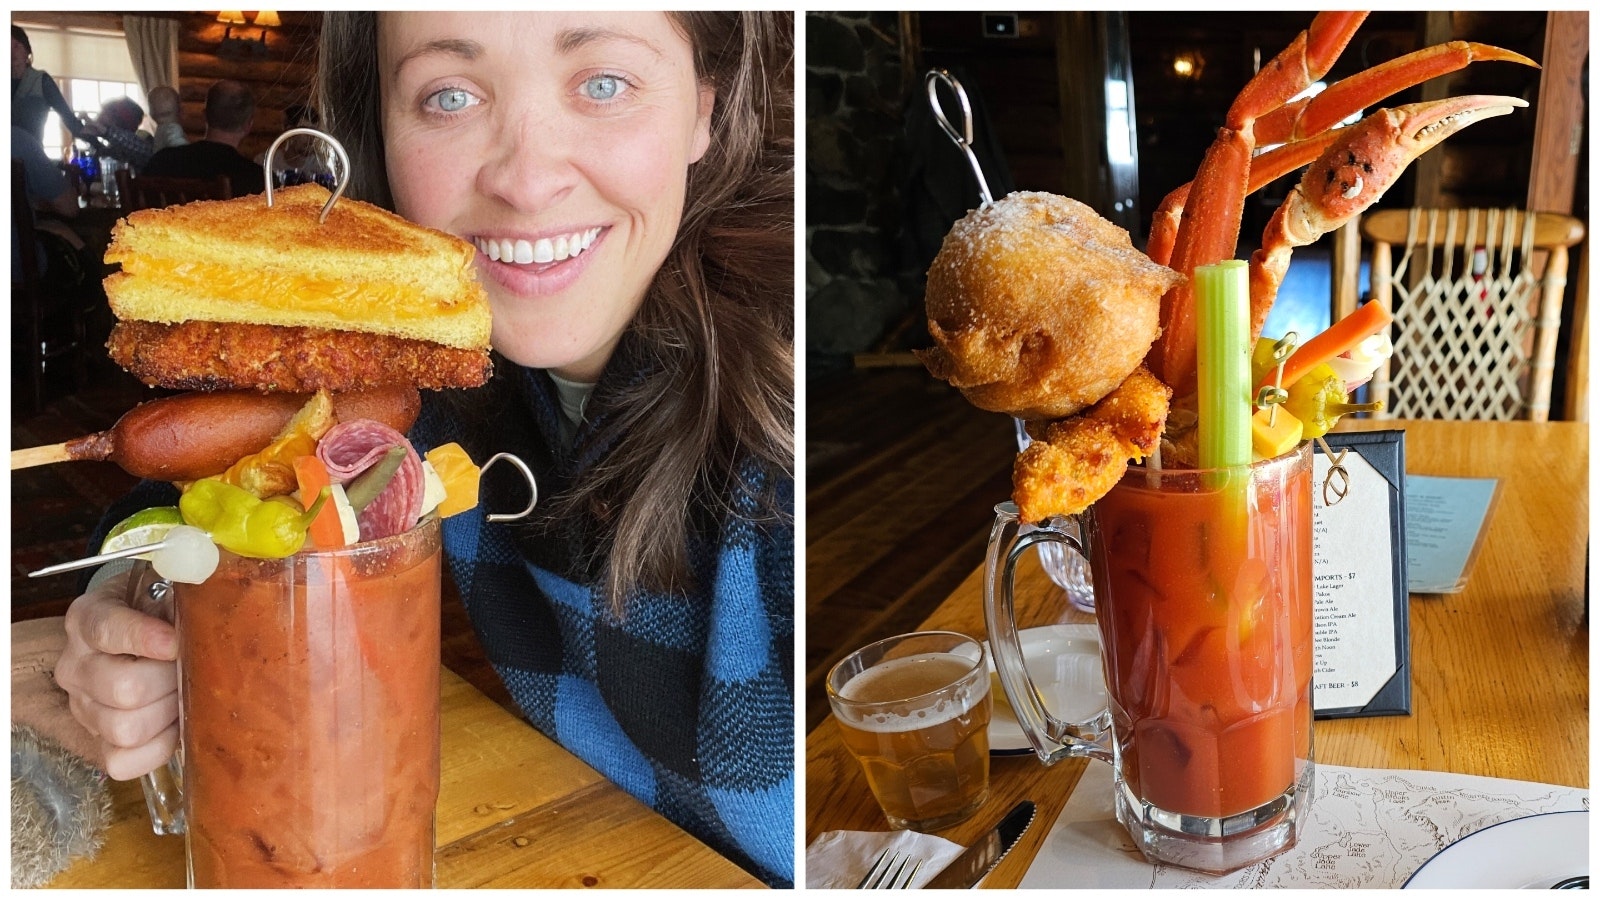 Whether it's with a seafood theme of crab legs or comfort food like a corn dog and grilled cheese, the Brooks Lake Lodge bloody mary is memorable.